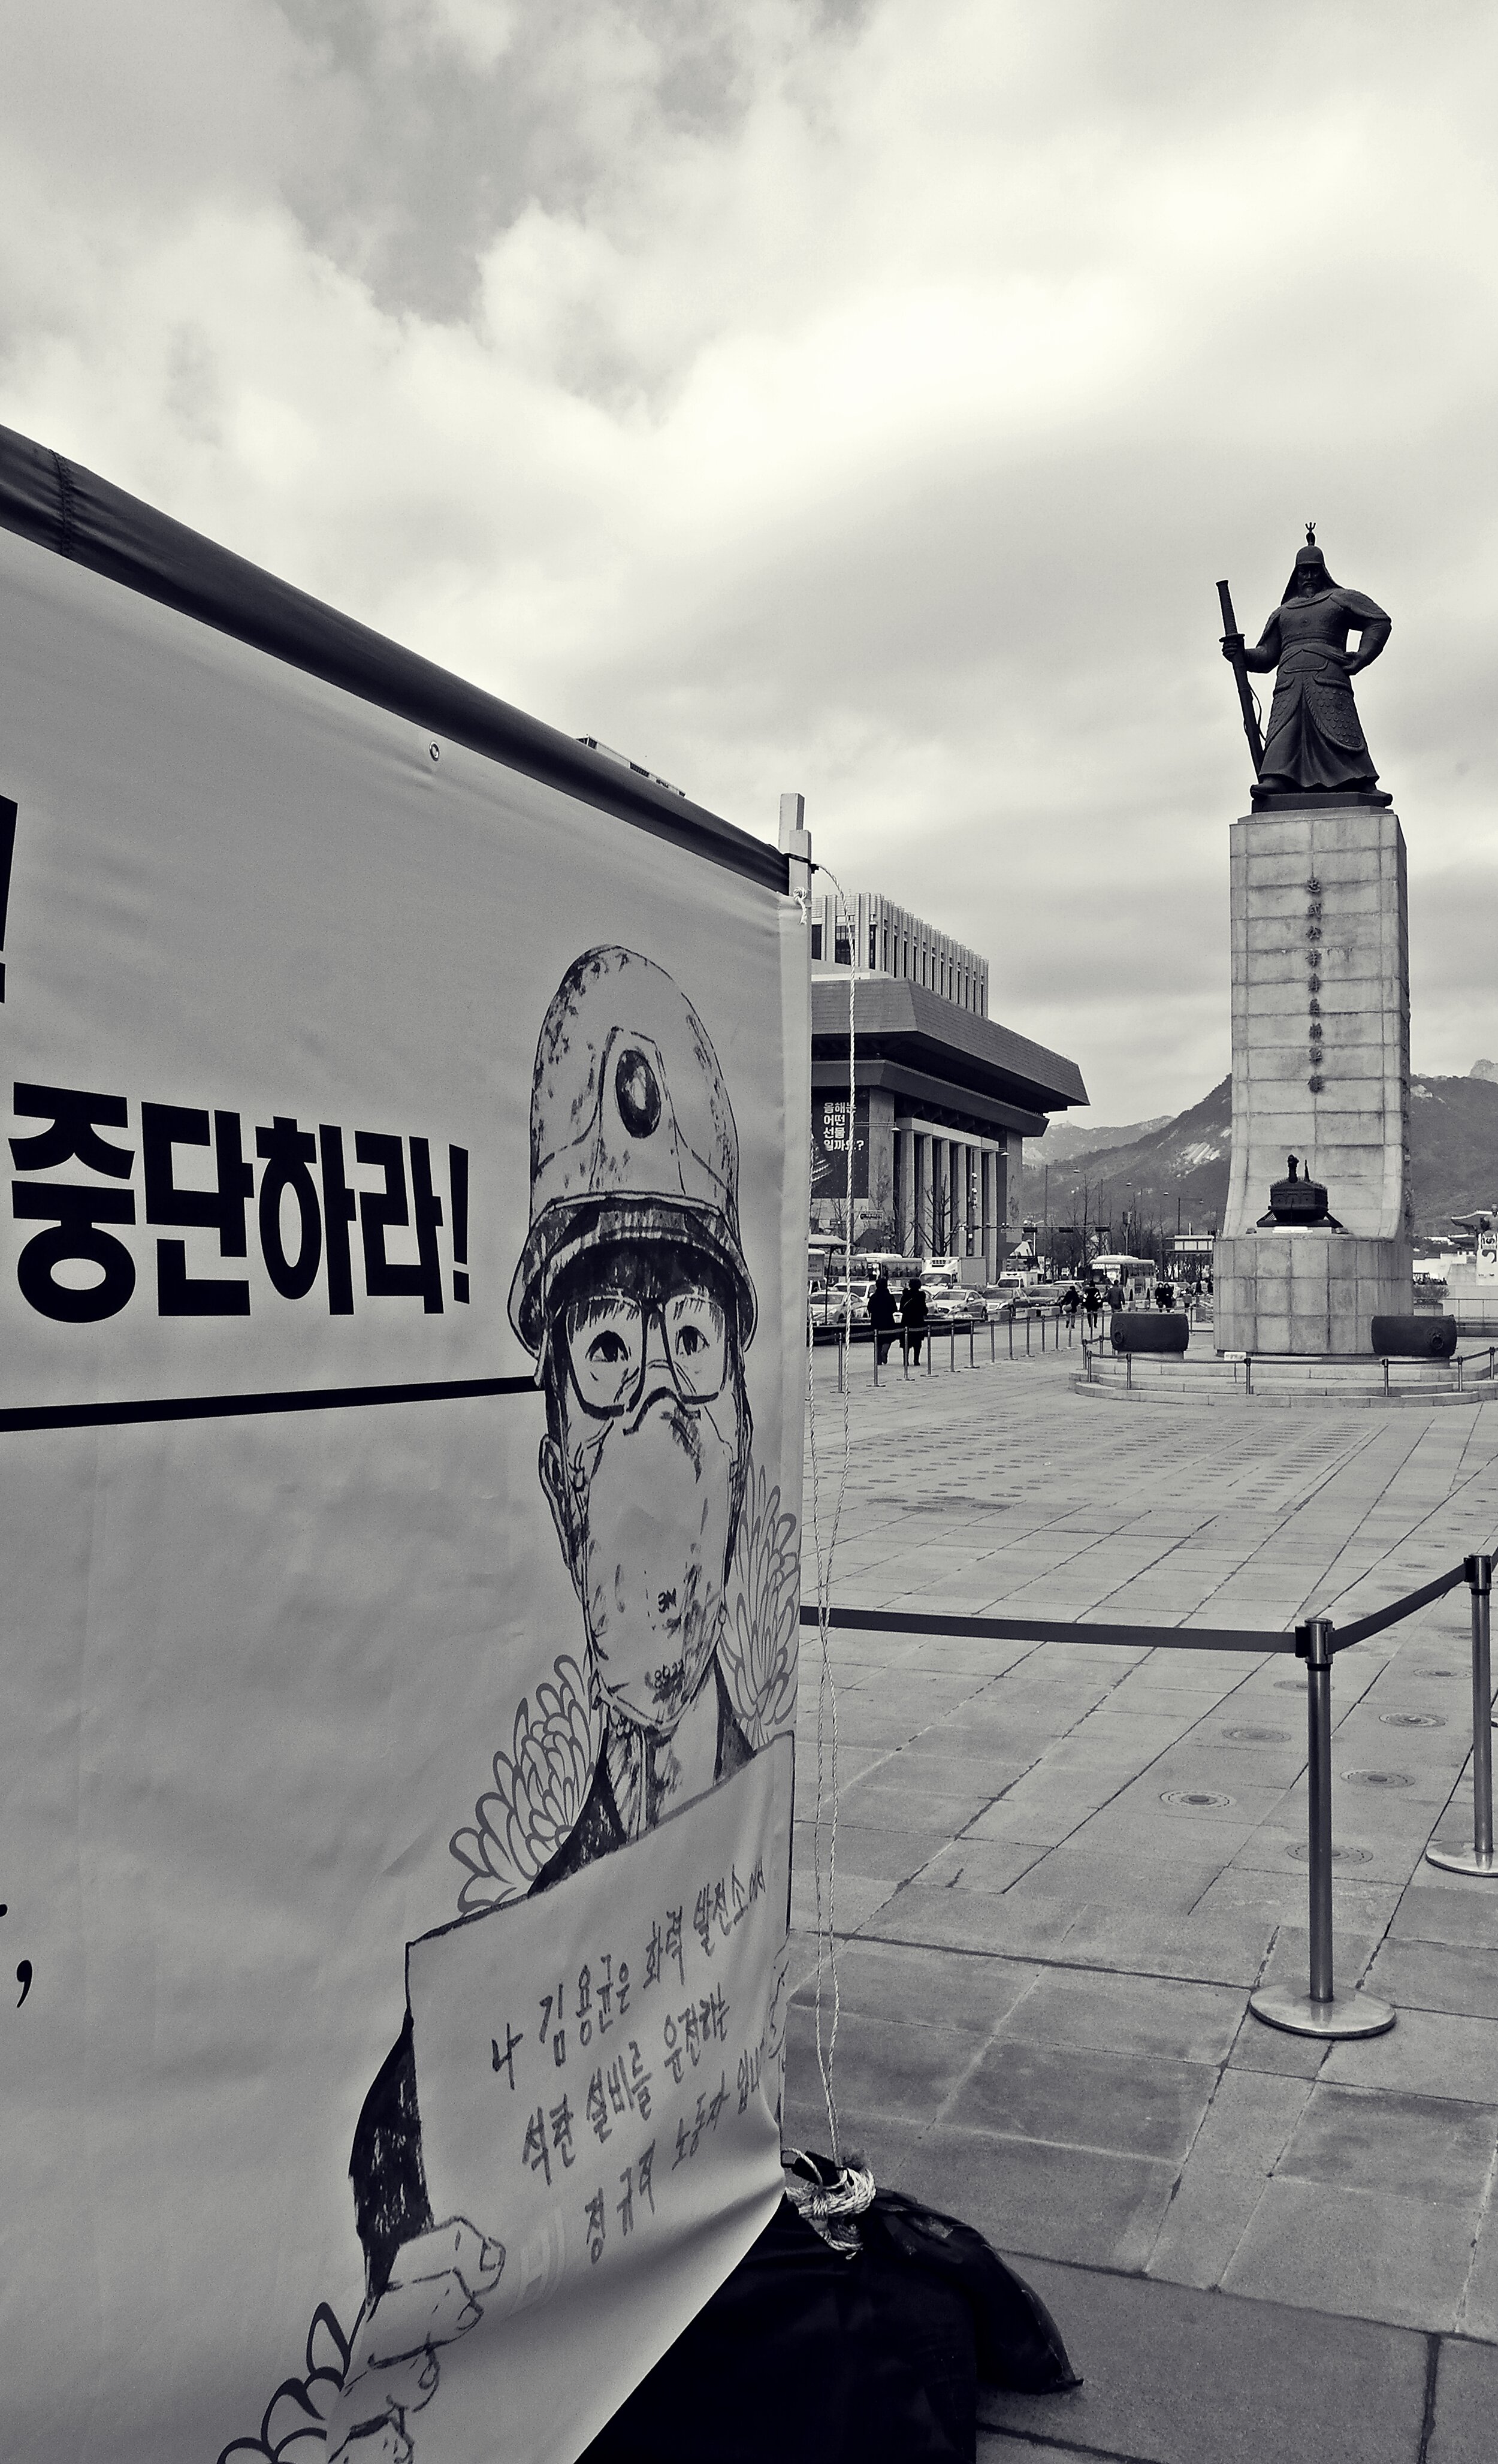  The statue of Admiral Yi Sun-shin stands at Gwanghwamun Square in Seoul, seemingly guarding the young Korean man in the picture. Because of its geographical proximity to the Blue House (the Korean President’s office) and national government offices,